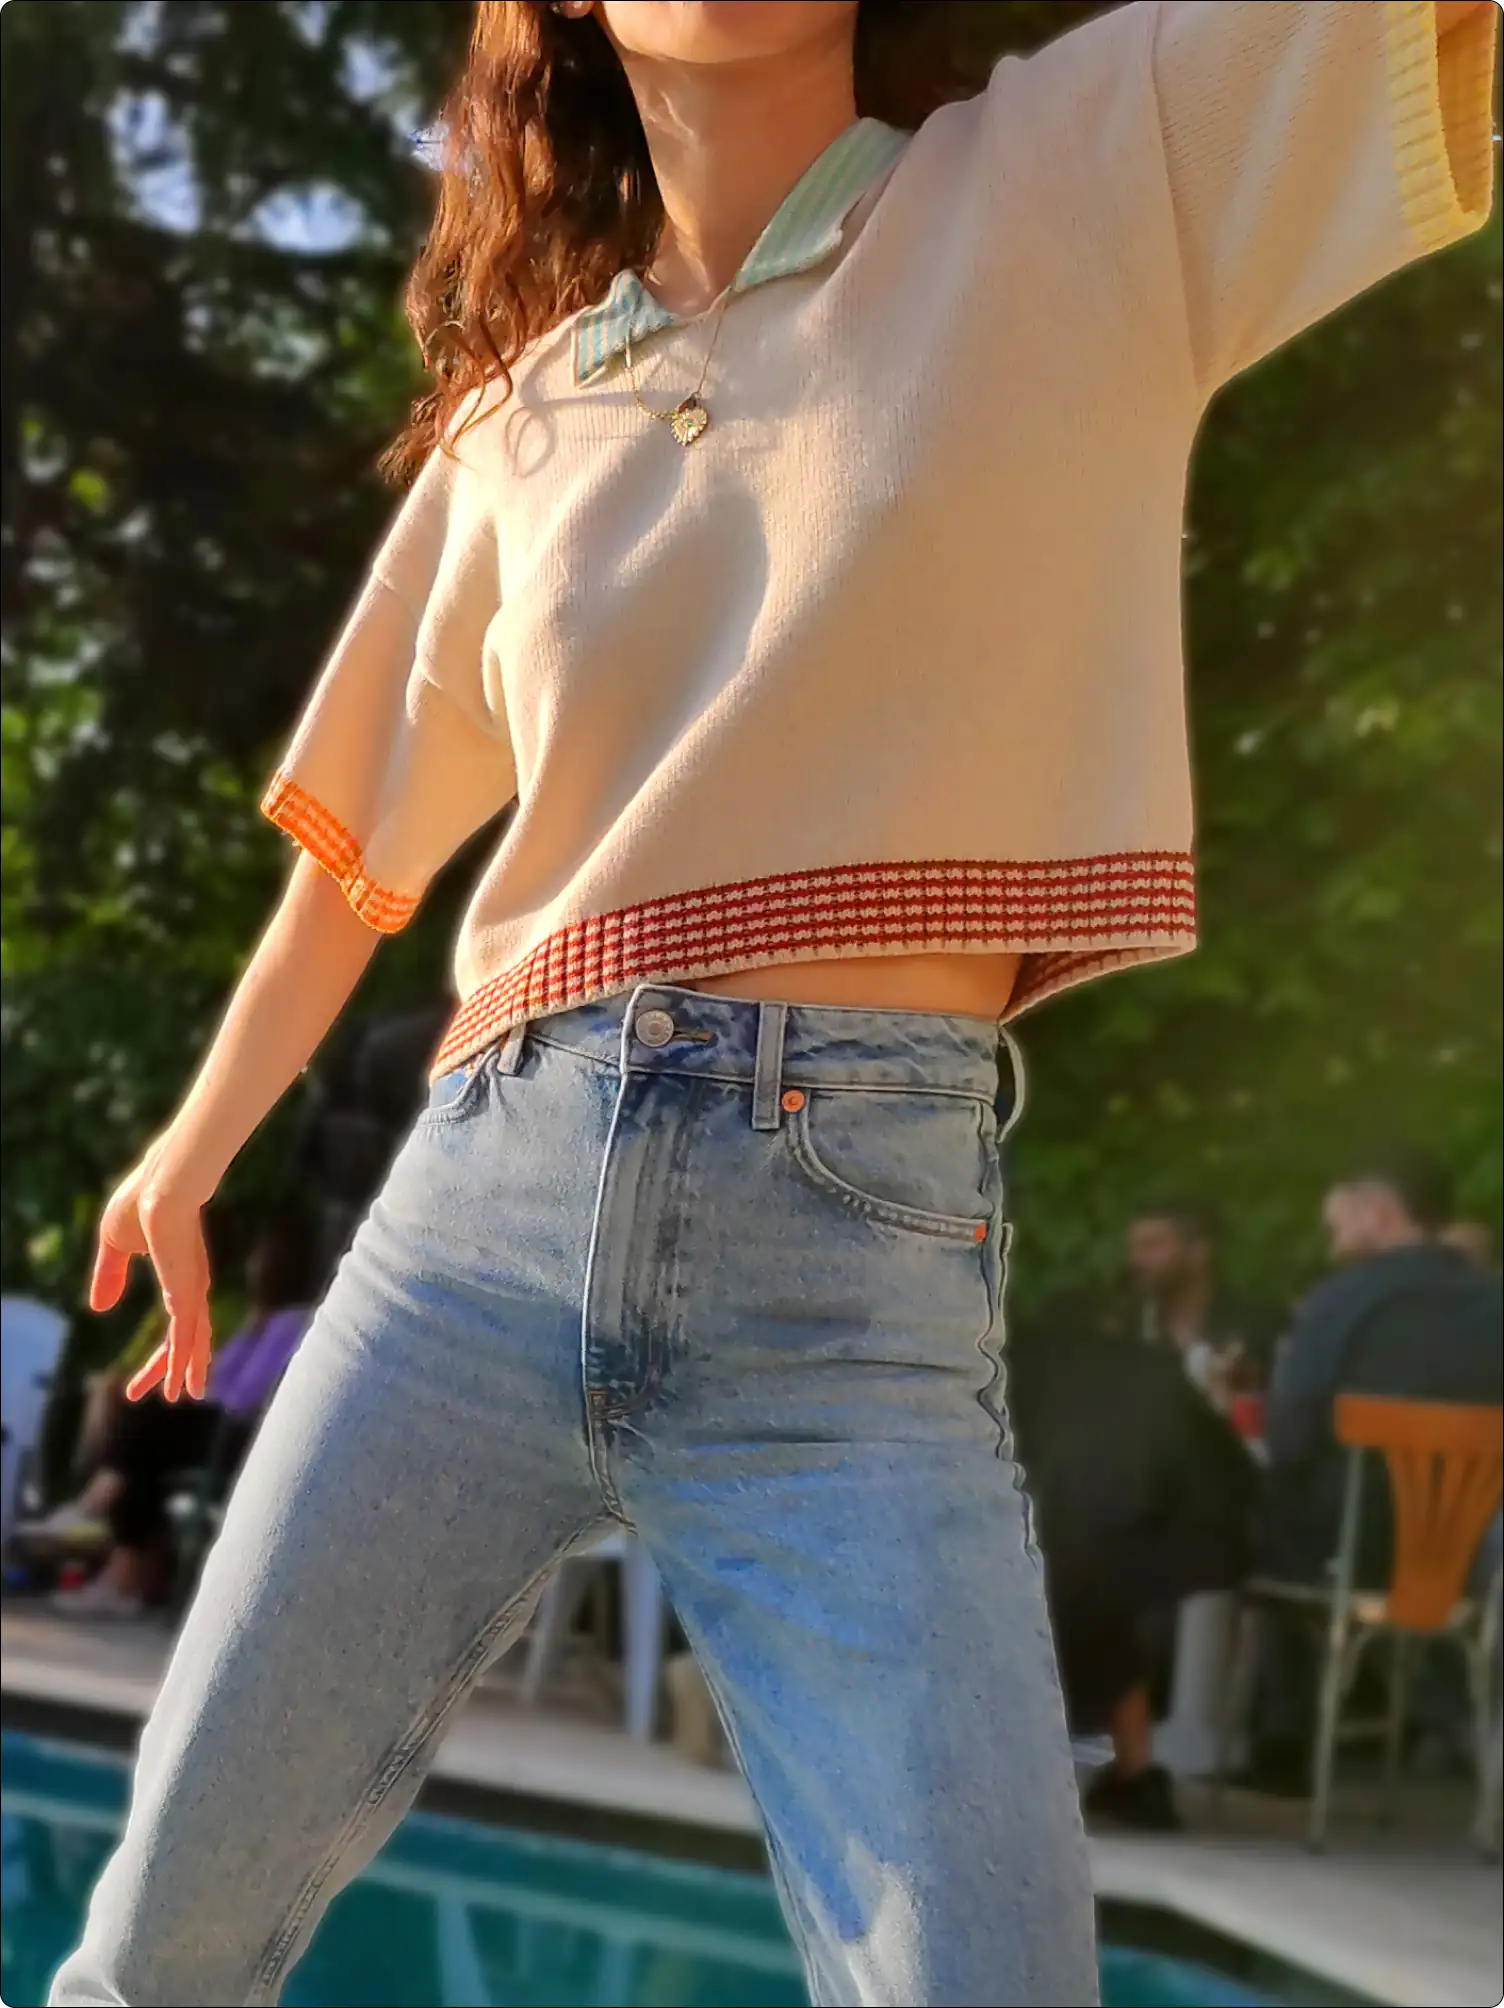 A young woman standing by the pool wearing a minimalistic designed knitting t-shirt.